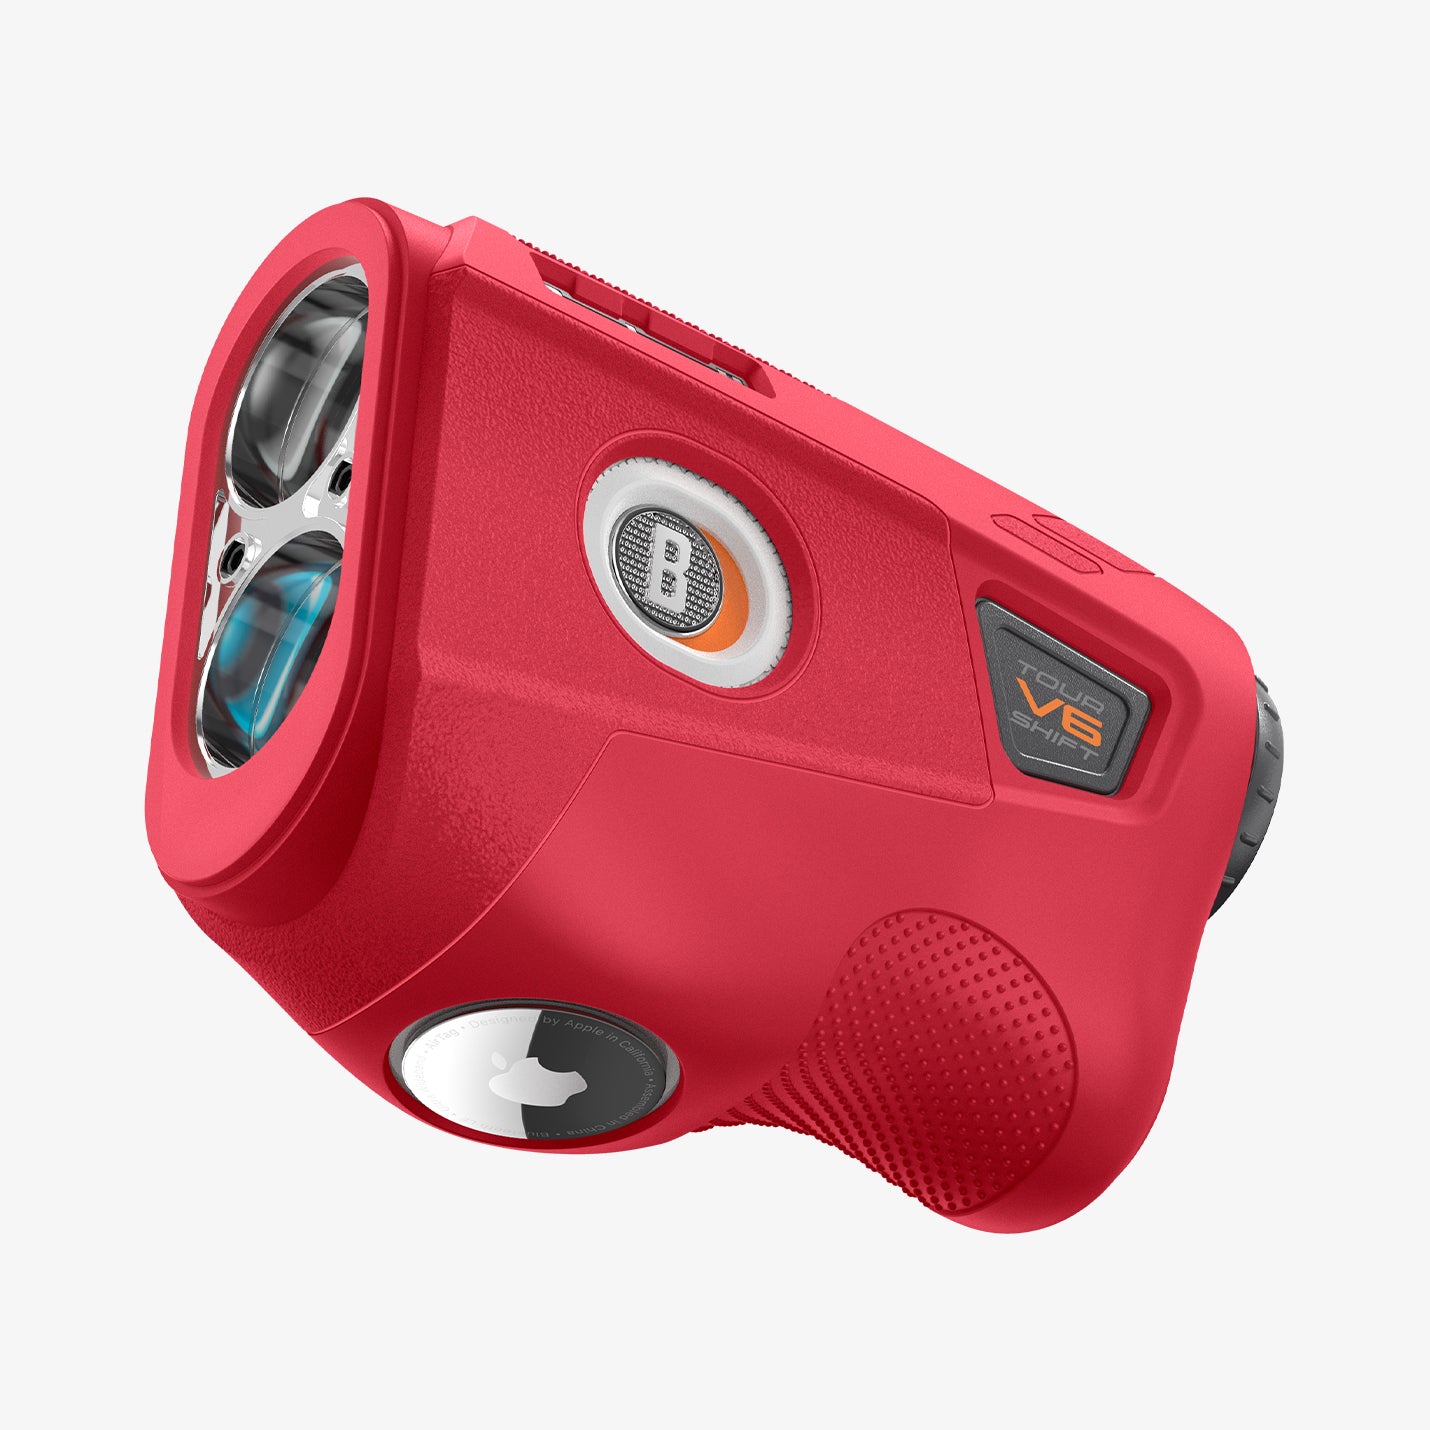 ACS07050 - Bushnell Tour V6 Shift Rangefinder Case Silicone Fit AirTag in red showing the front, side and bottom